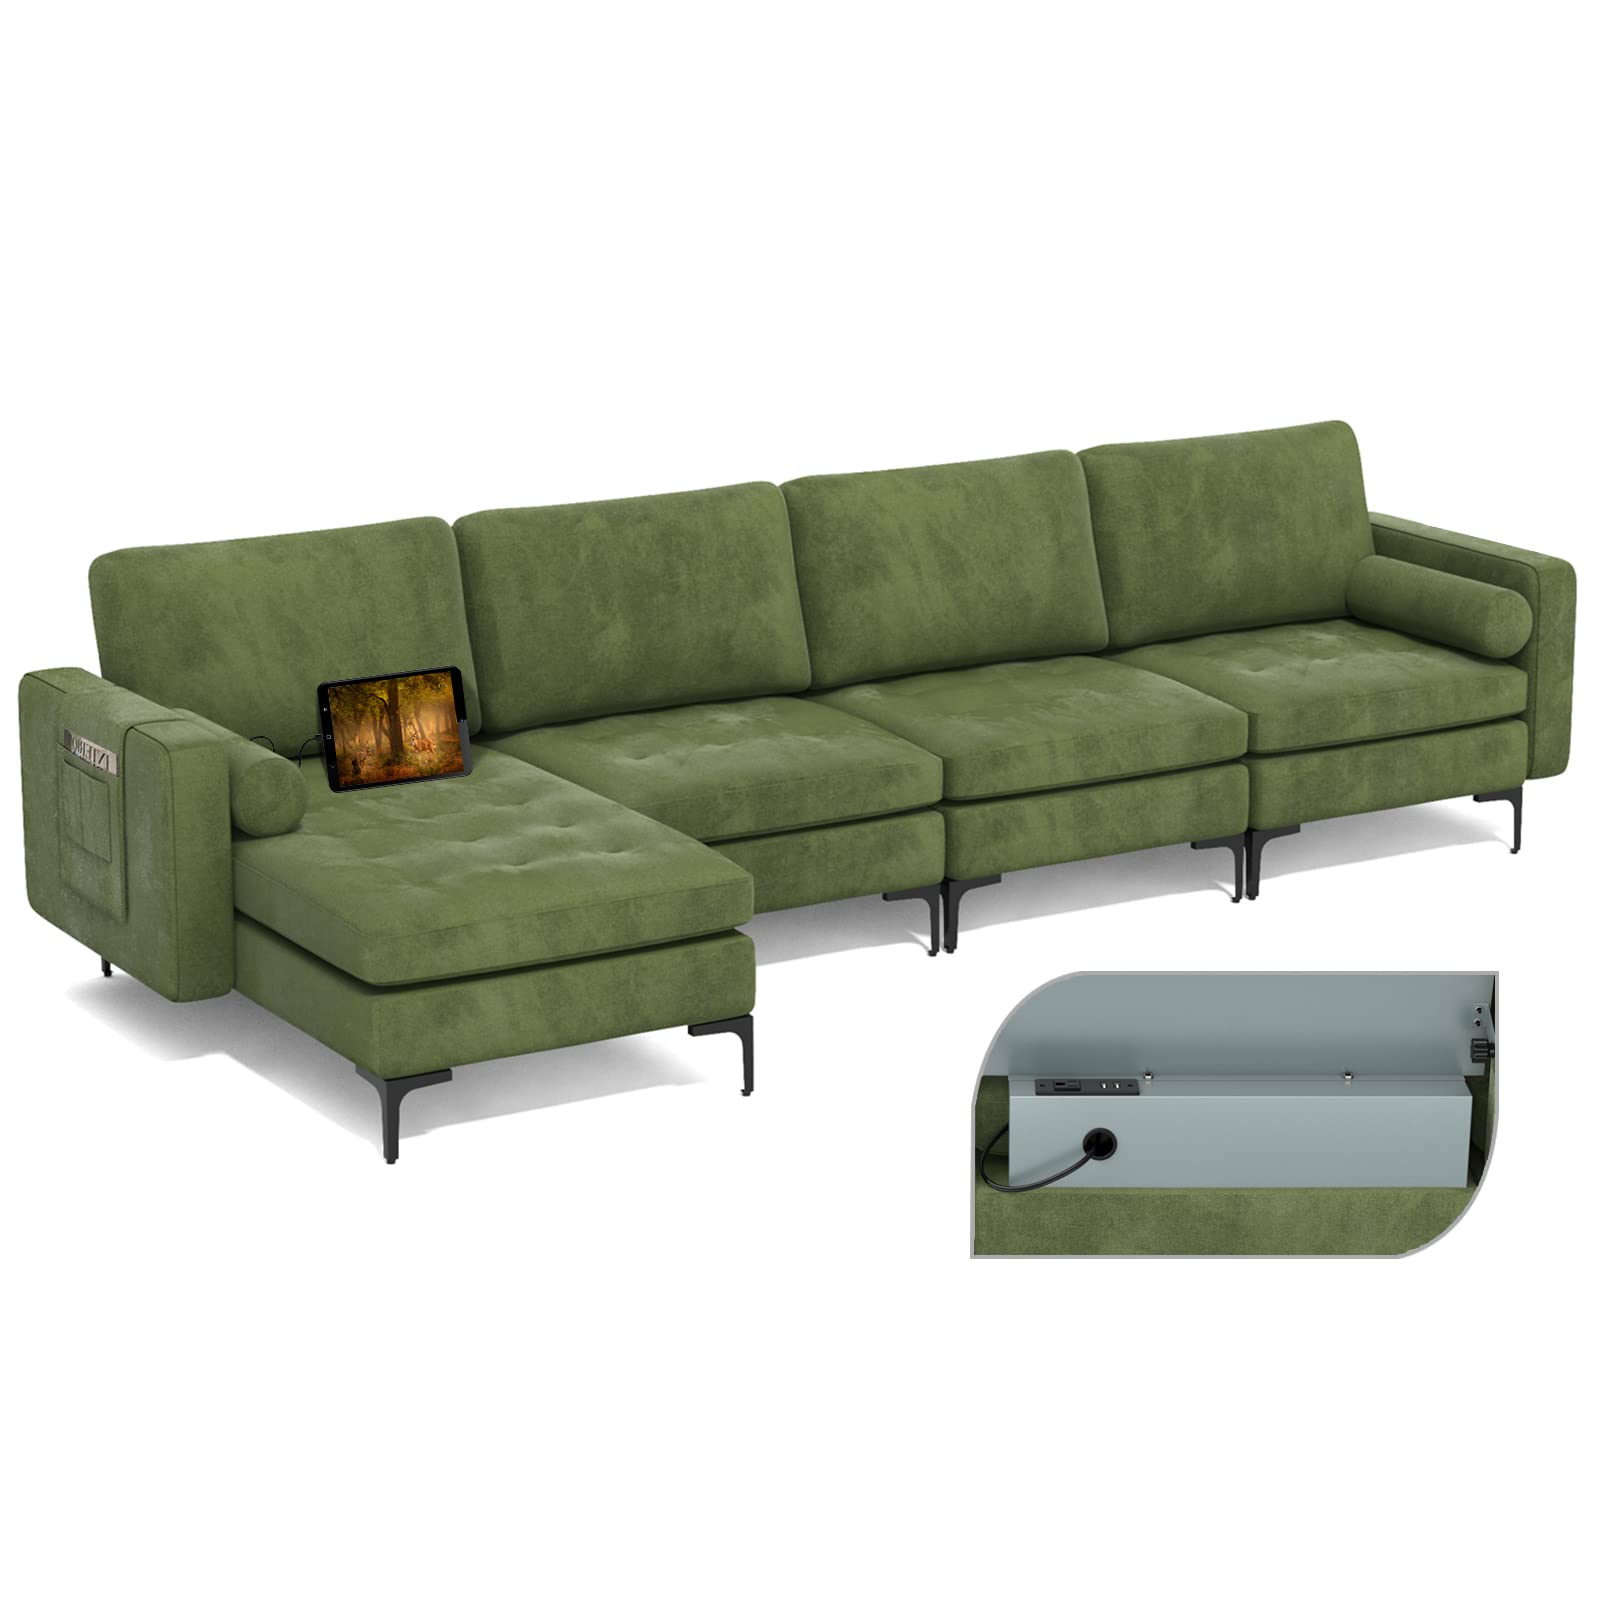 Giantex Sectional Sofa Couch, Convertible Sleeper with 2 or 1 USB Ports Socket